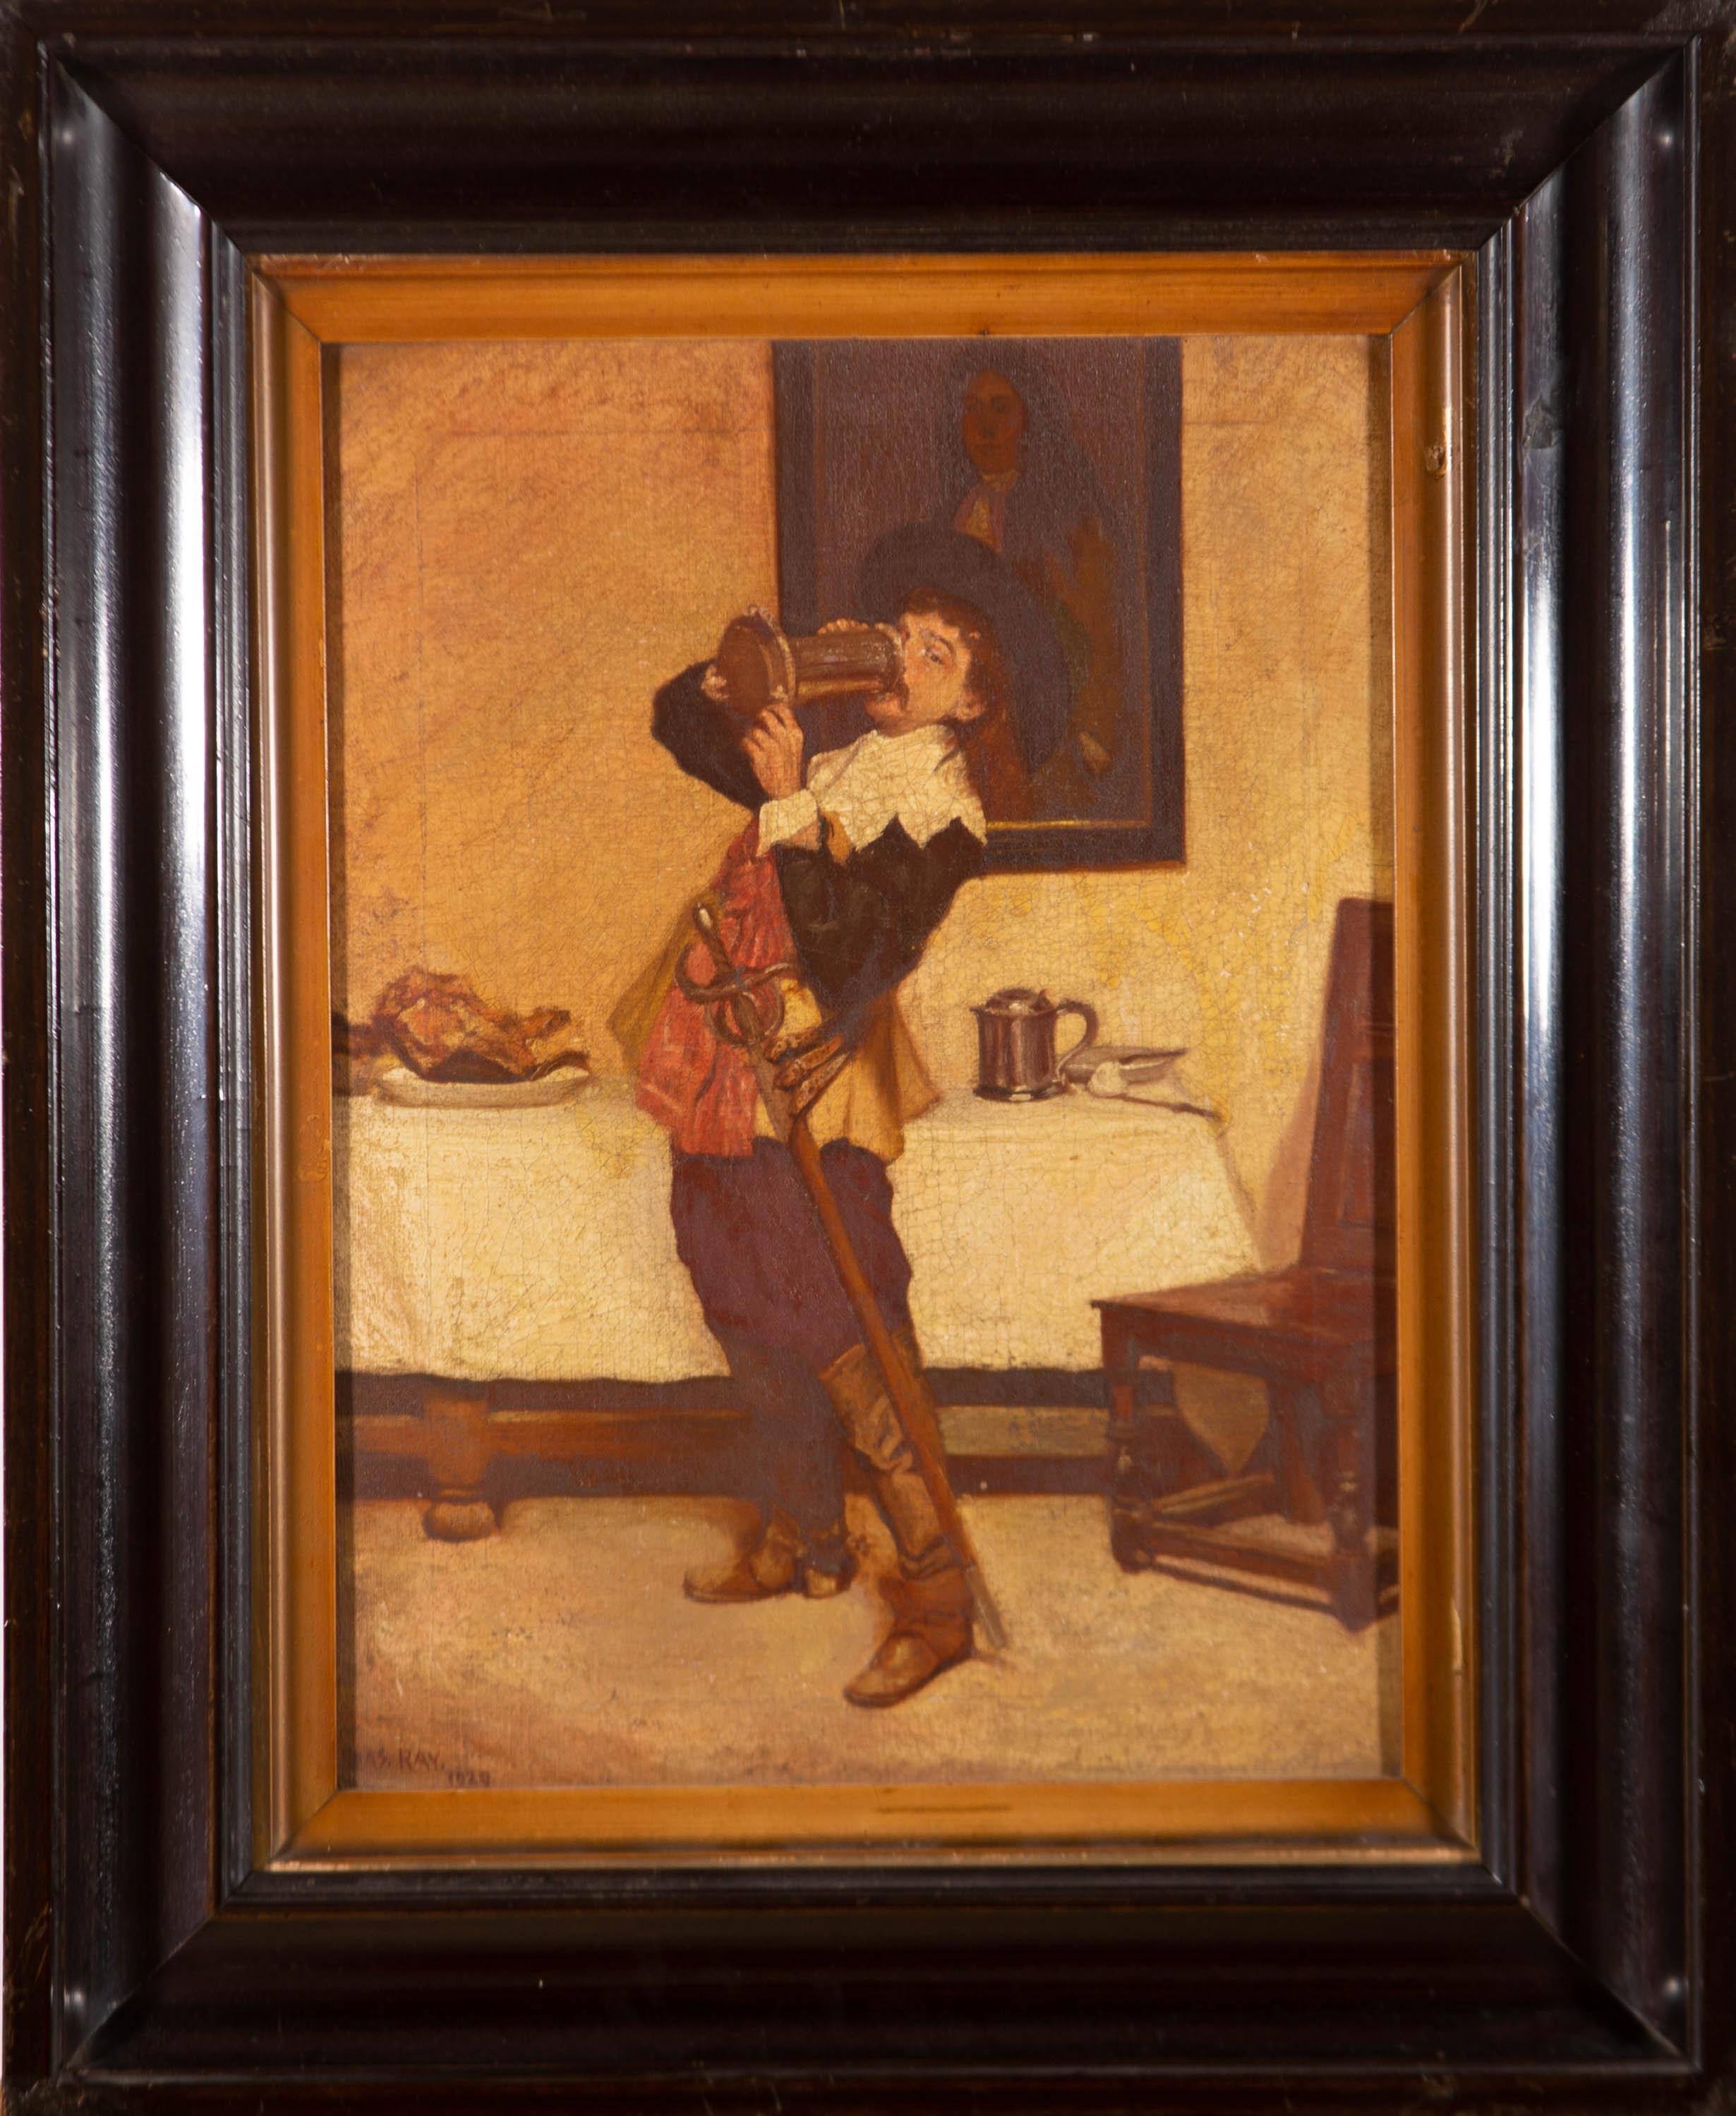 Unknown Portrait Painting - Ray - Fine Framed 1920 Oil, Jolly Cavalier